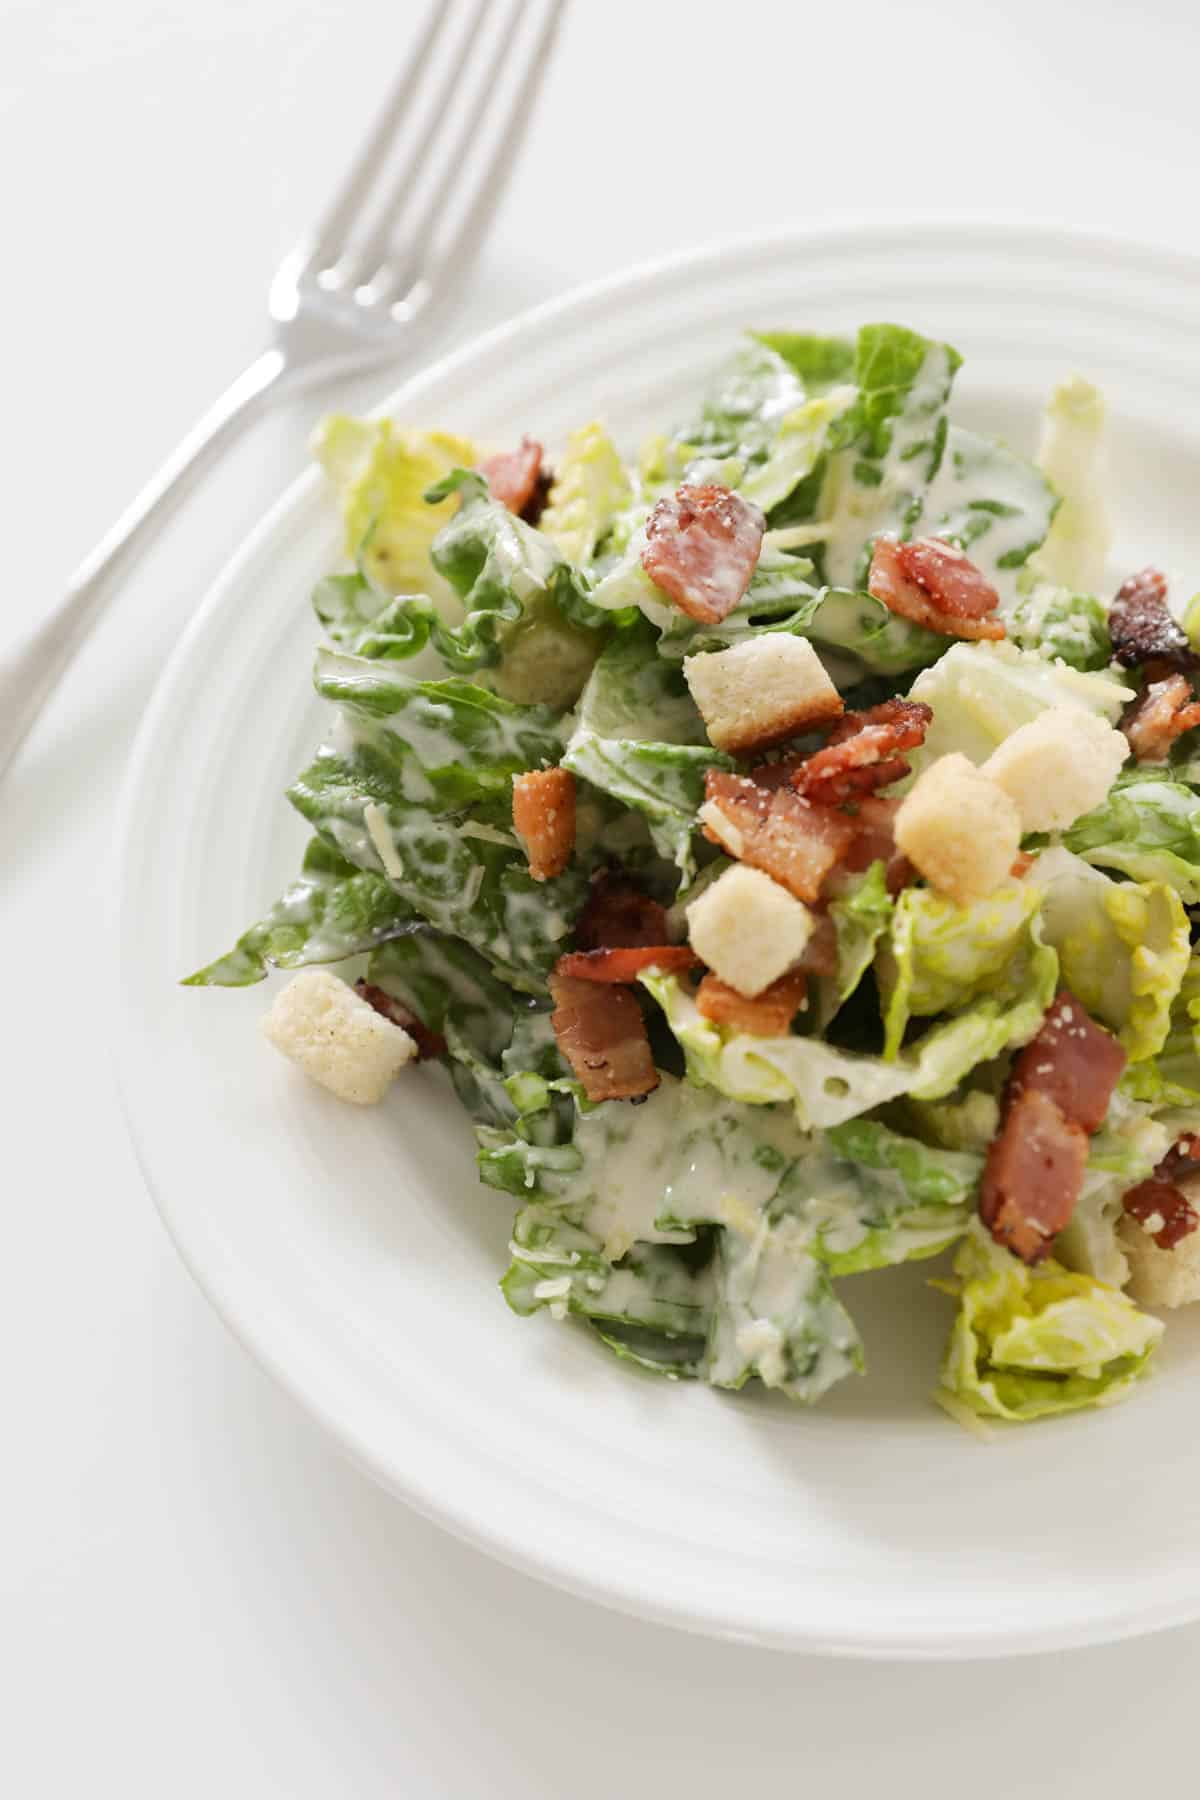 Cos lettuce, crispy bacon and crunchy croutons tossed wiht a creamy dressing.